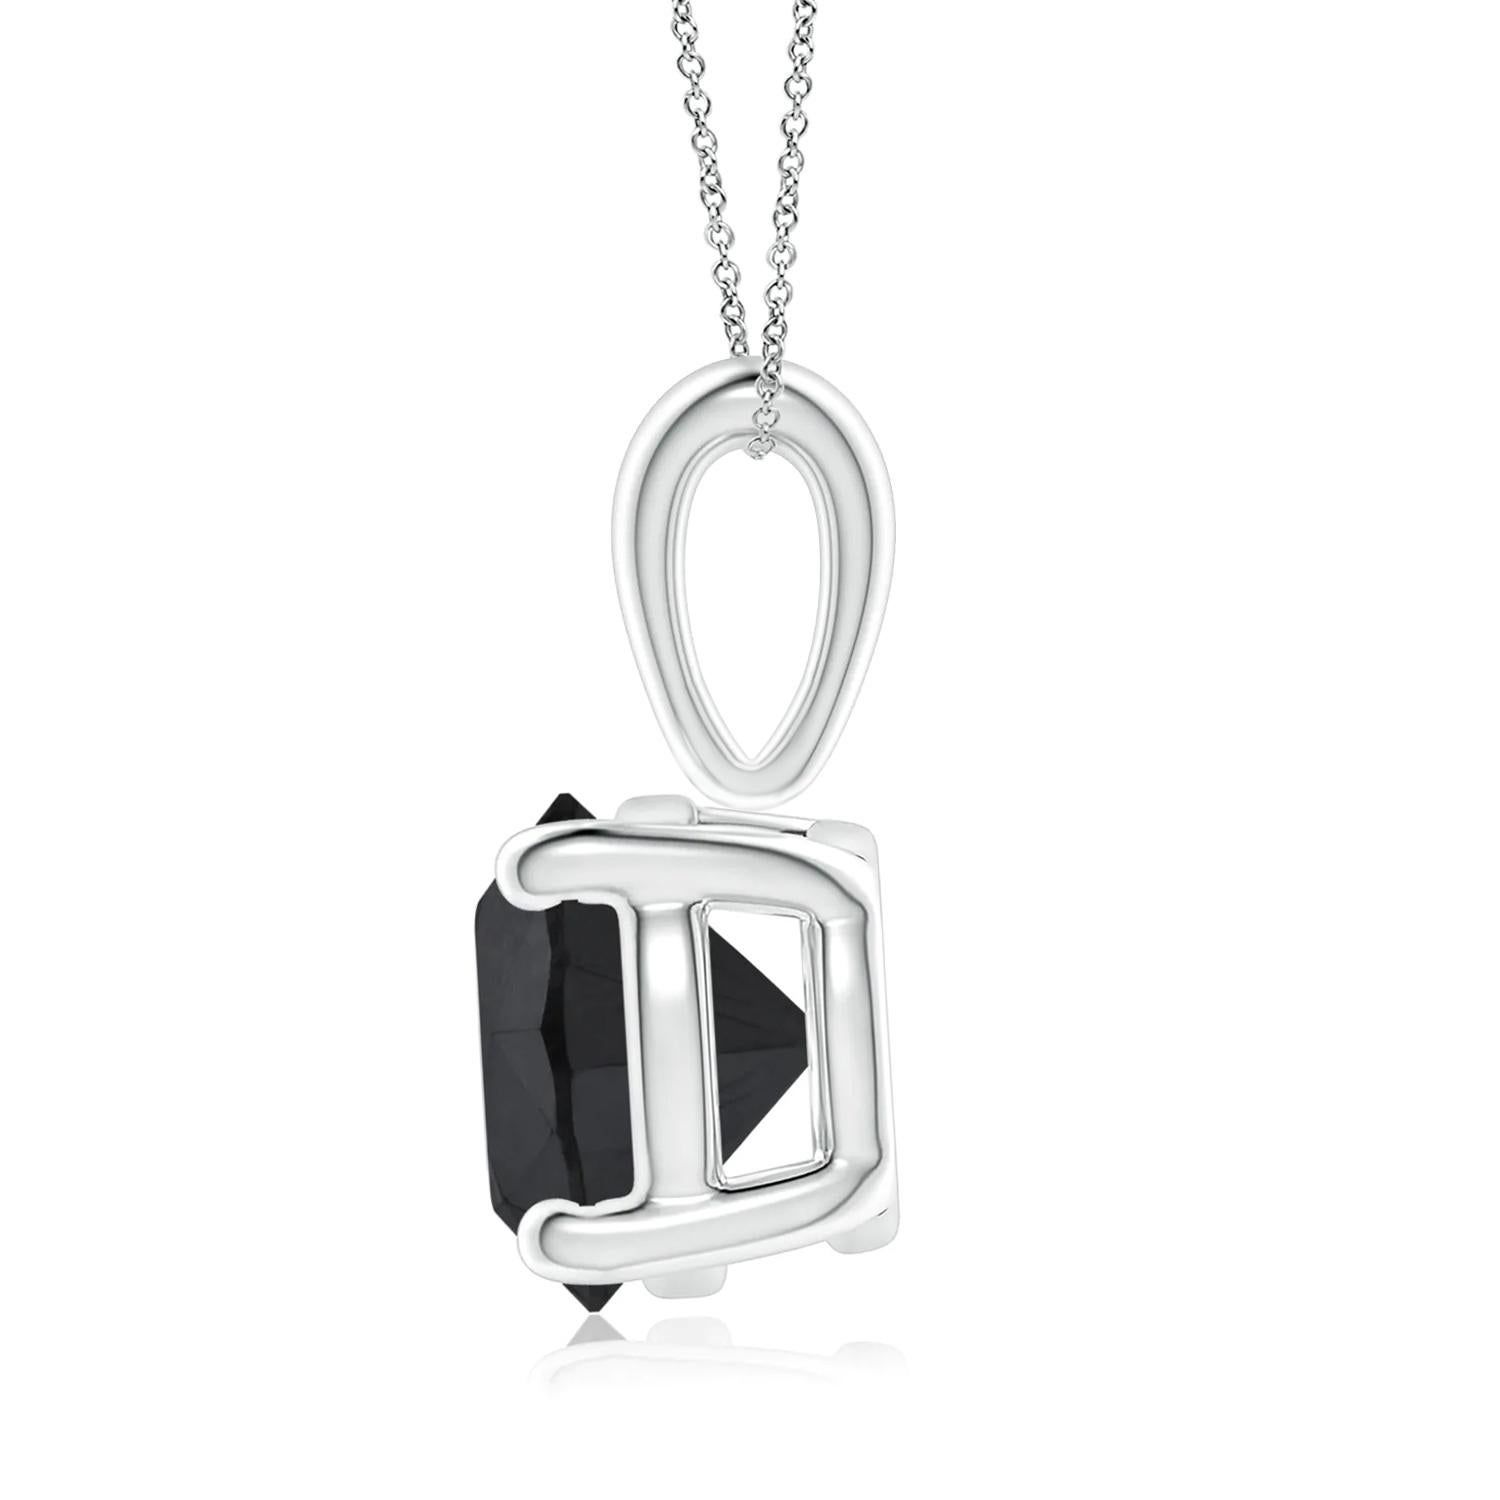 Surprise a special woman in your life with this breathtaking, statement hand crafted solitaire black diamond necklace. This eye-catching pendant necklace features a 1.56 carat round cut black diamond, measuring 6.90 x 6.95 x 4.80 mm set in 14k white